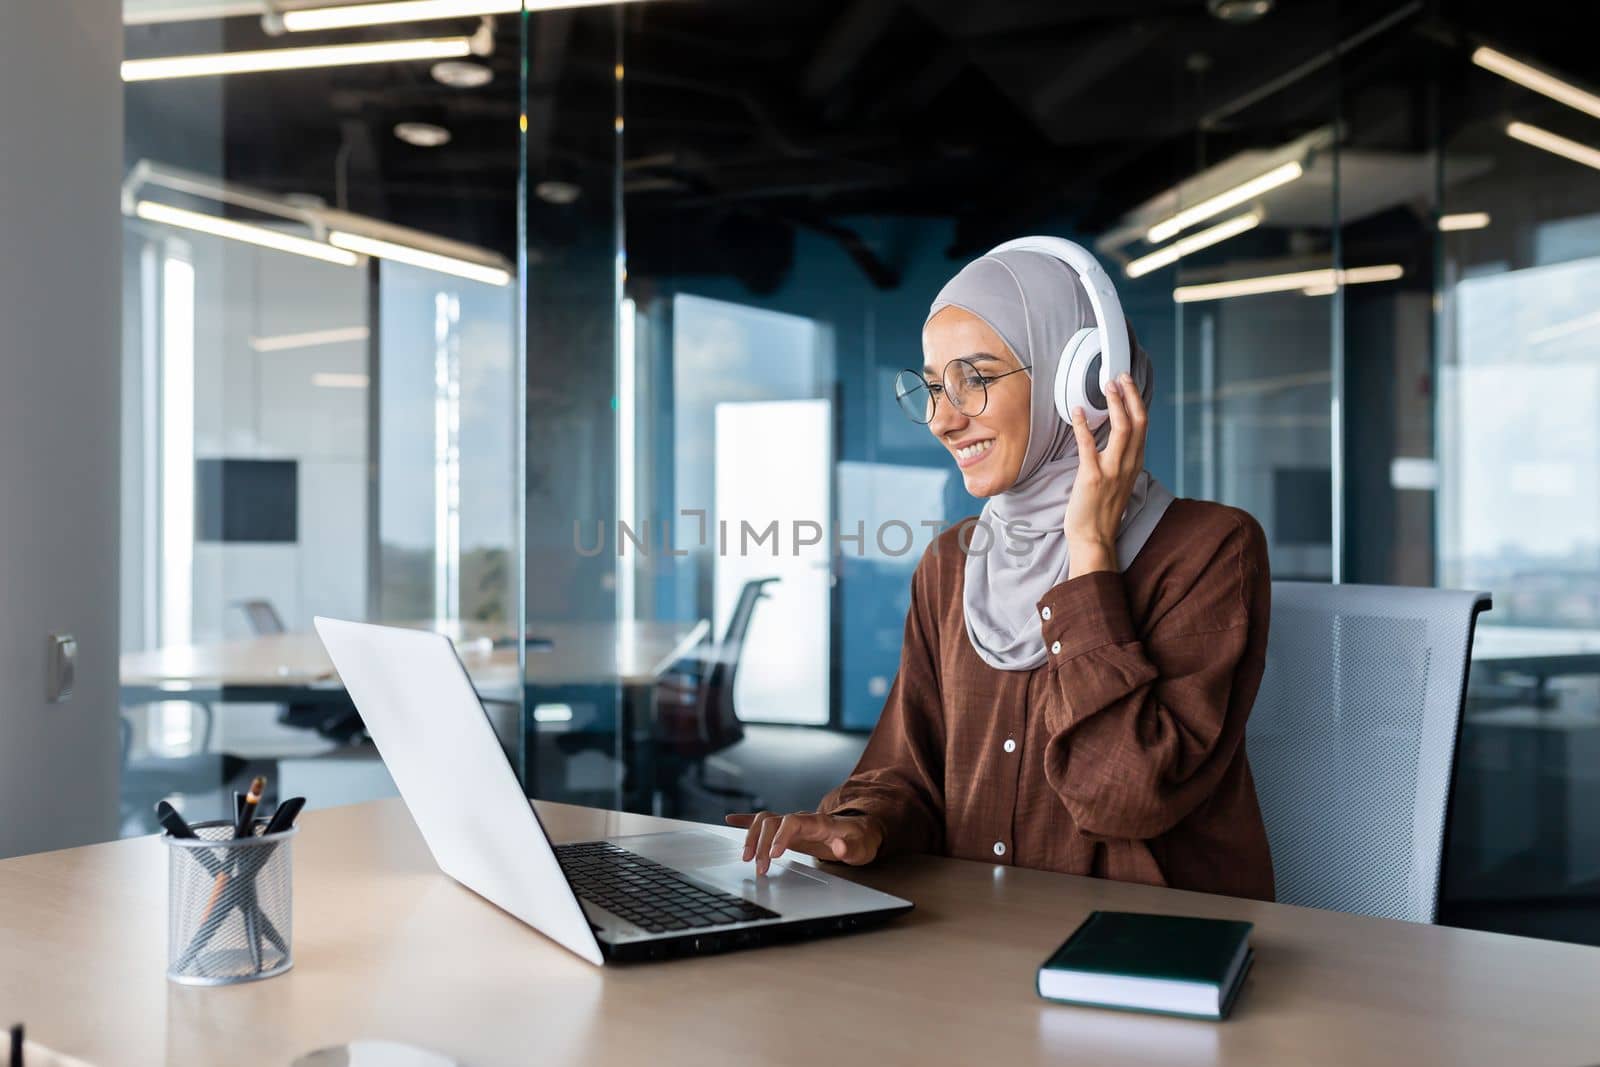 Successful modern businesswoman working inside office with laptop, Muslim woman wearing hijab and headphones listening to audio books and podcasts at workplace, satisfied and successful woman.